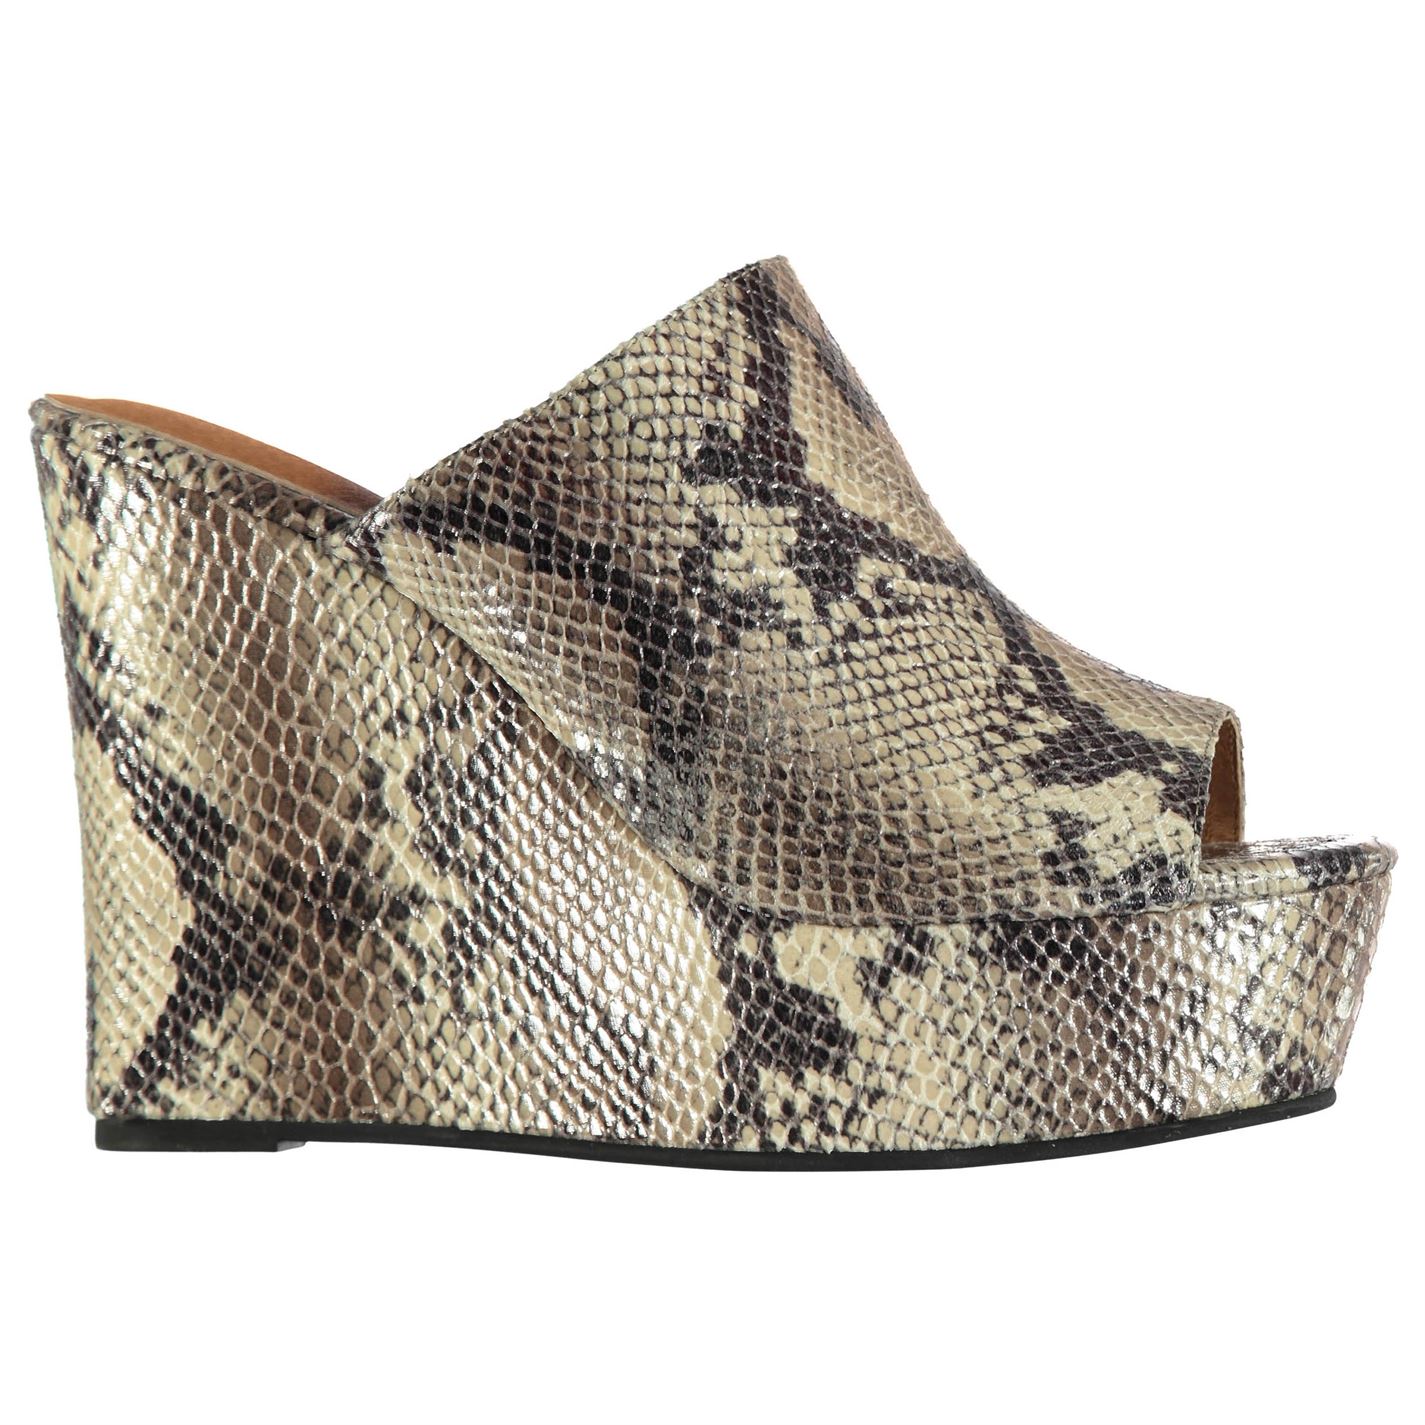 Jeffrey Campbell Mansfield Wedged Shoes gri snake